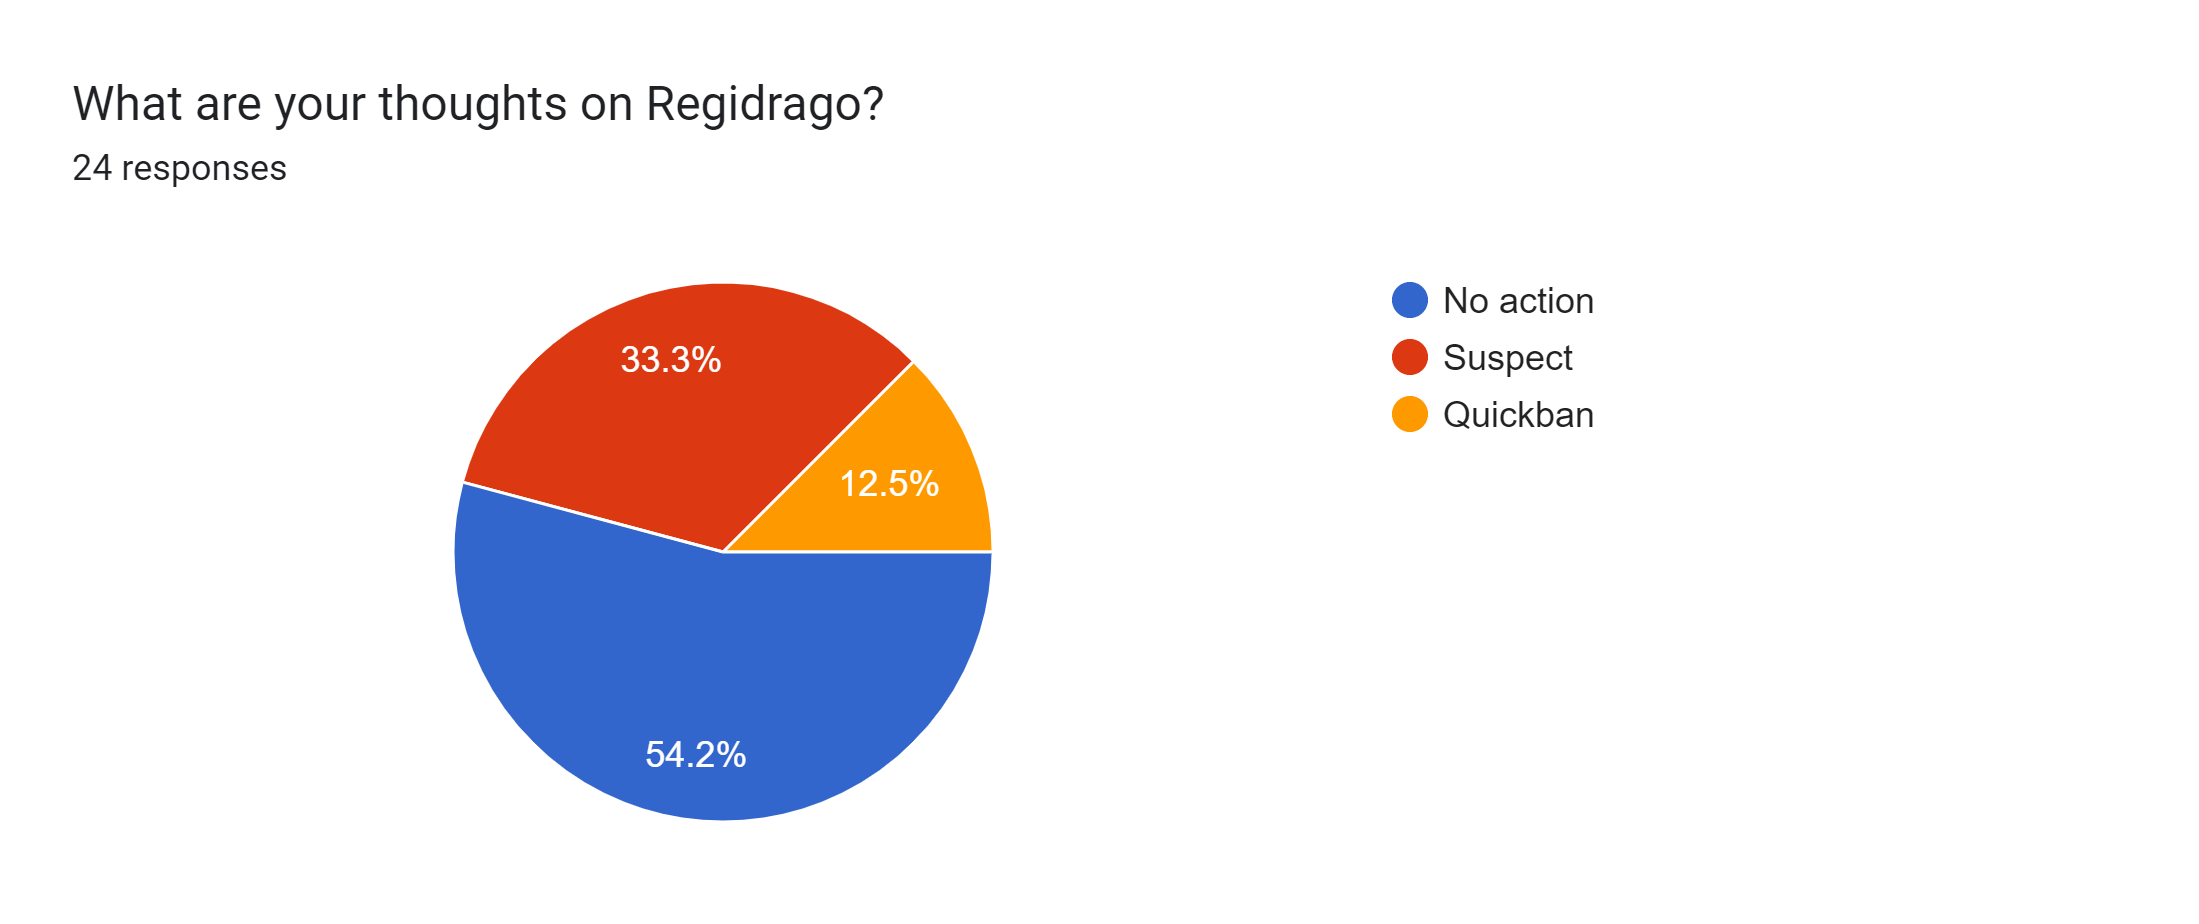 Forms response chart. Question title: What are your thoughts on Regidrago?. Number of responses: 24 responses.